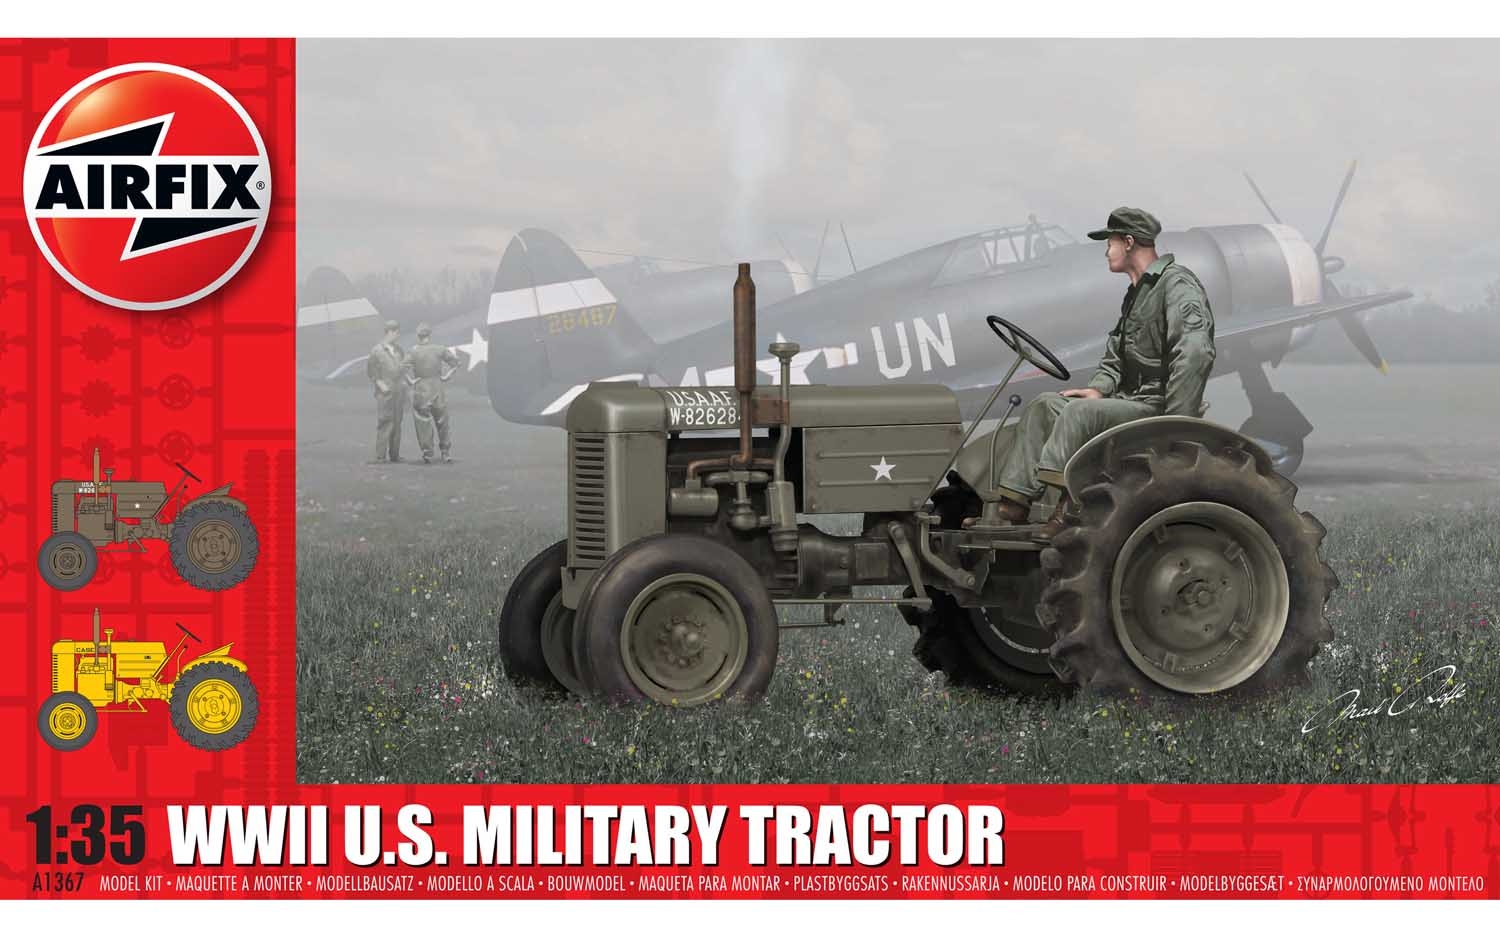 Airfix WWII U.S Military Tractor 1:35 Model Kit A1367 